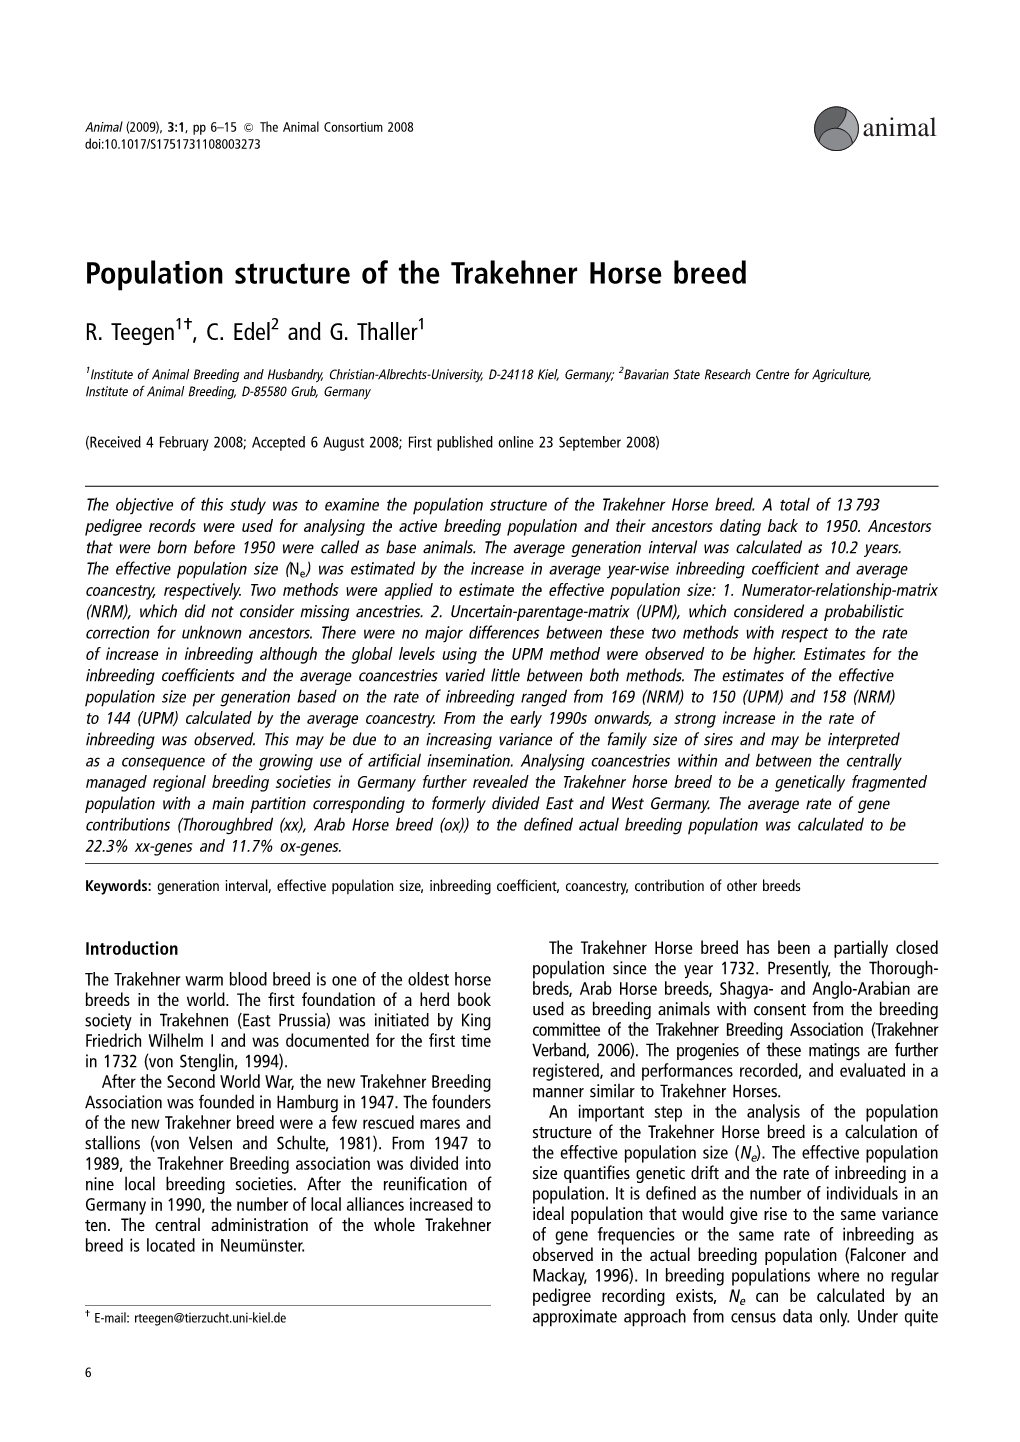 Population Structure of the Trakehner Horse Breed